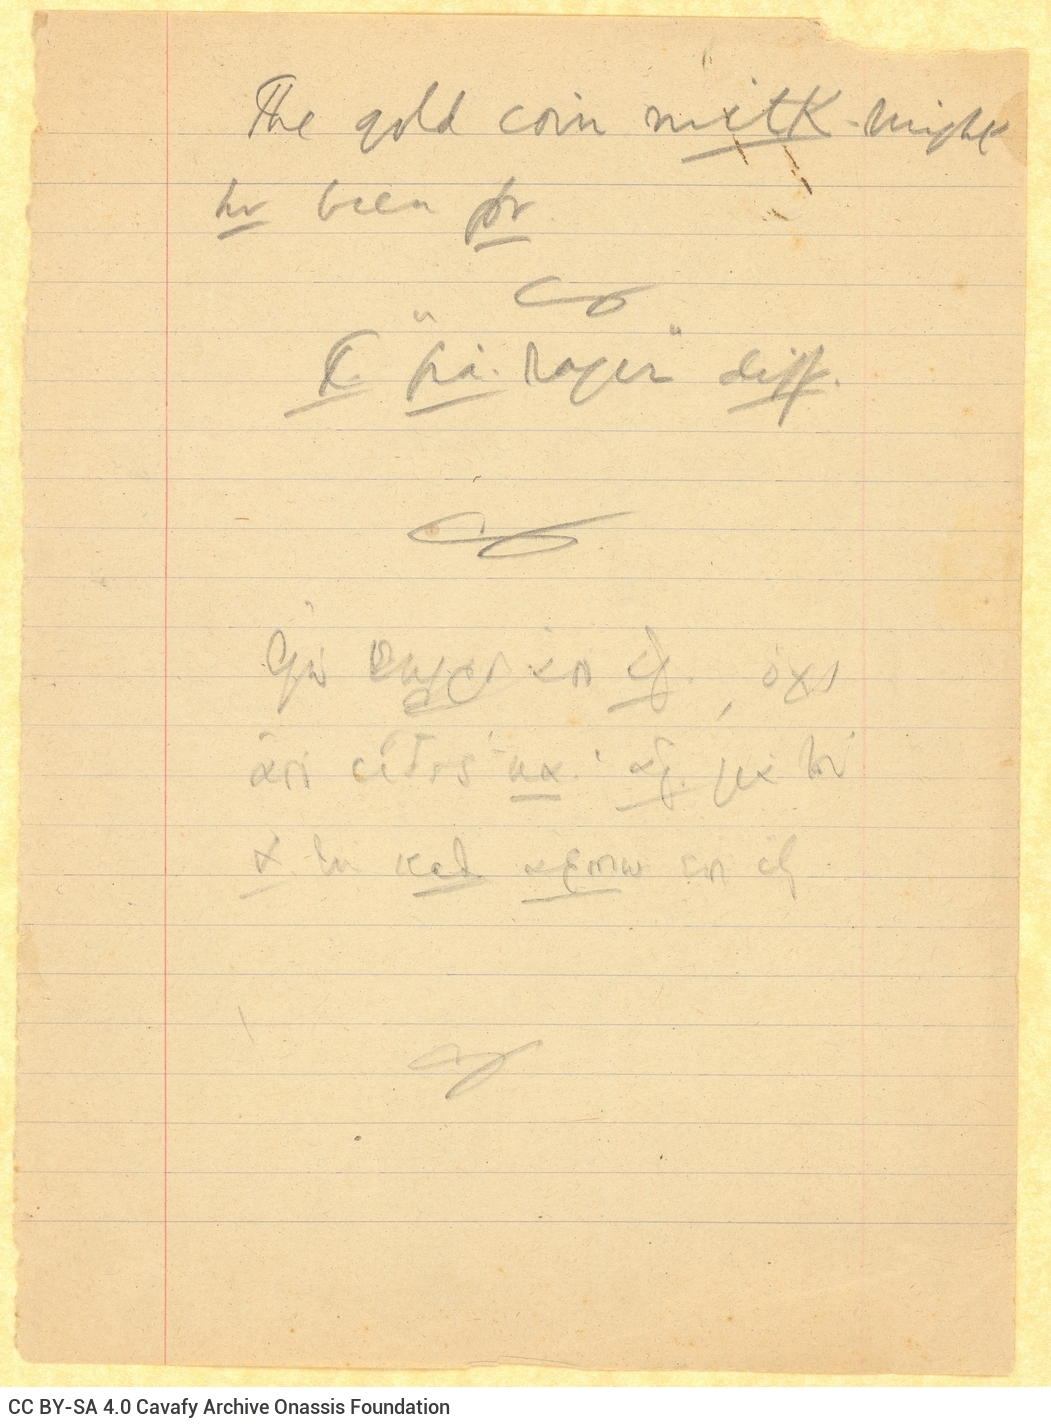 Handwritten notes by Cavafy in English and Greek (possibly of personal nature), on one side of a ruled sheet. Abbreviation